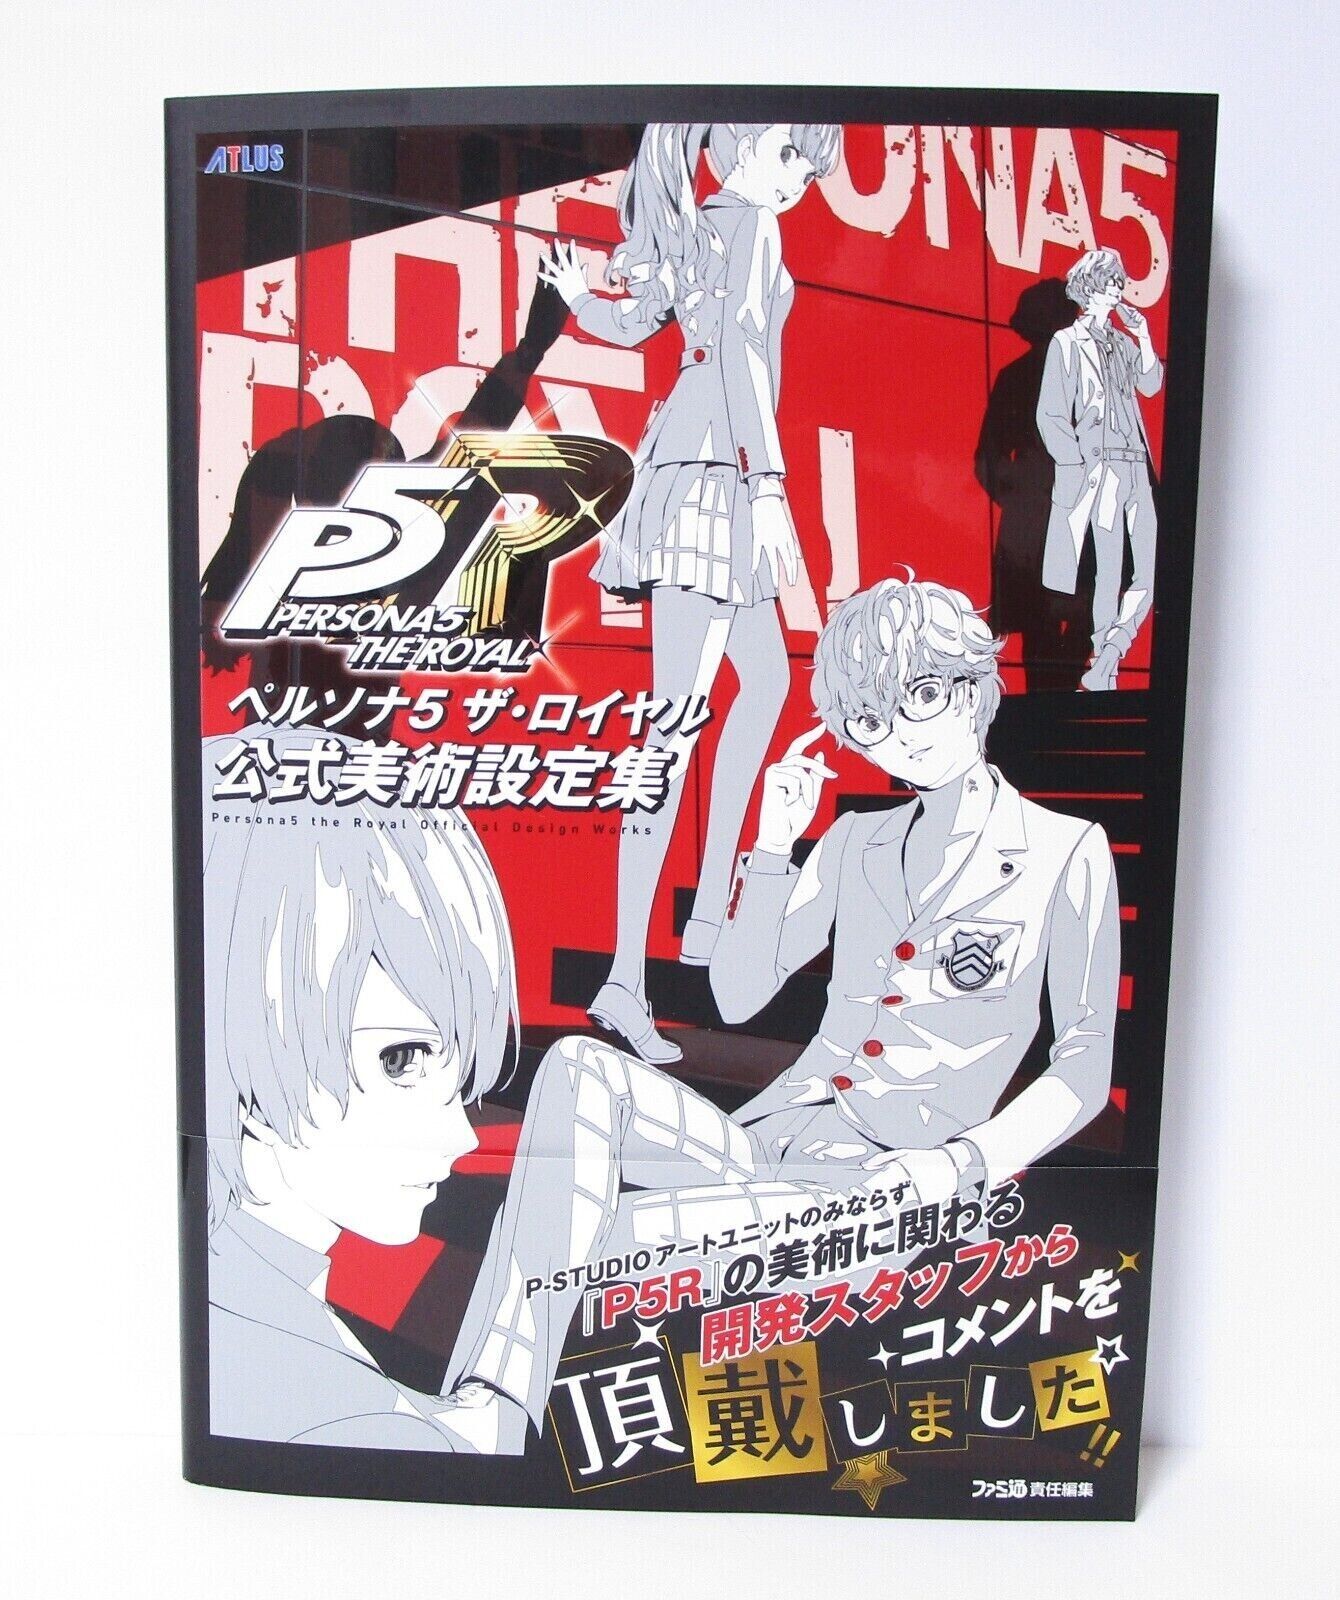 PERSONA 5 THE ROYAL OFFICIAL ART SETTING COLLECTION NEW